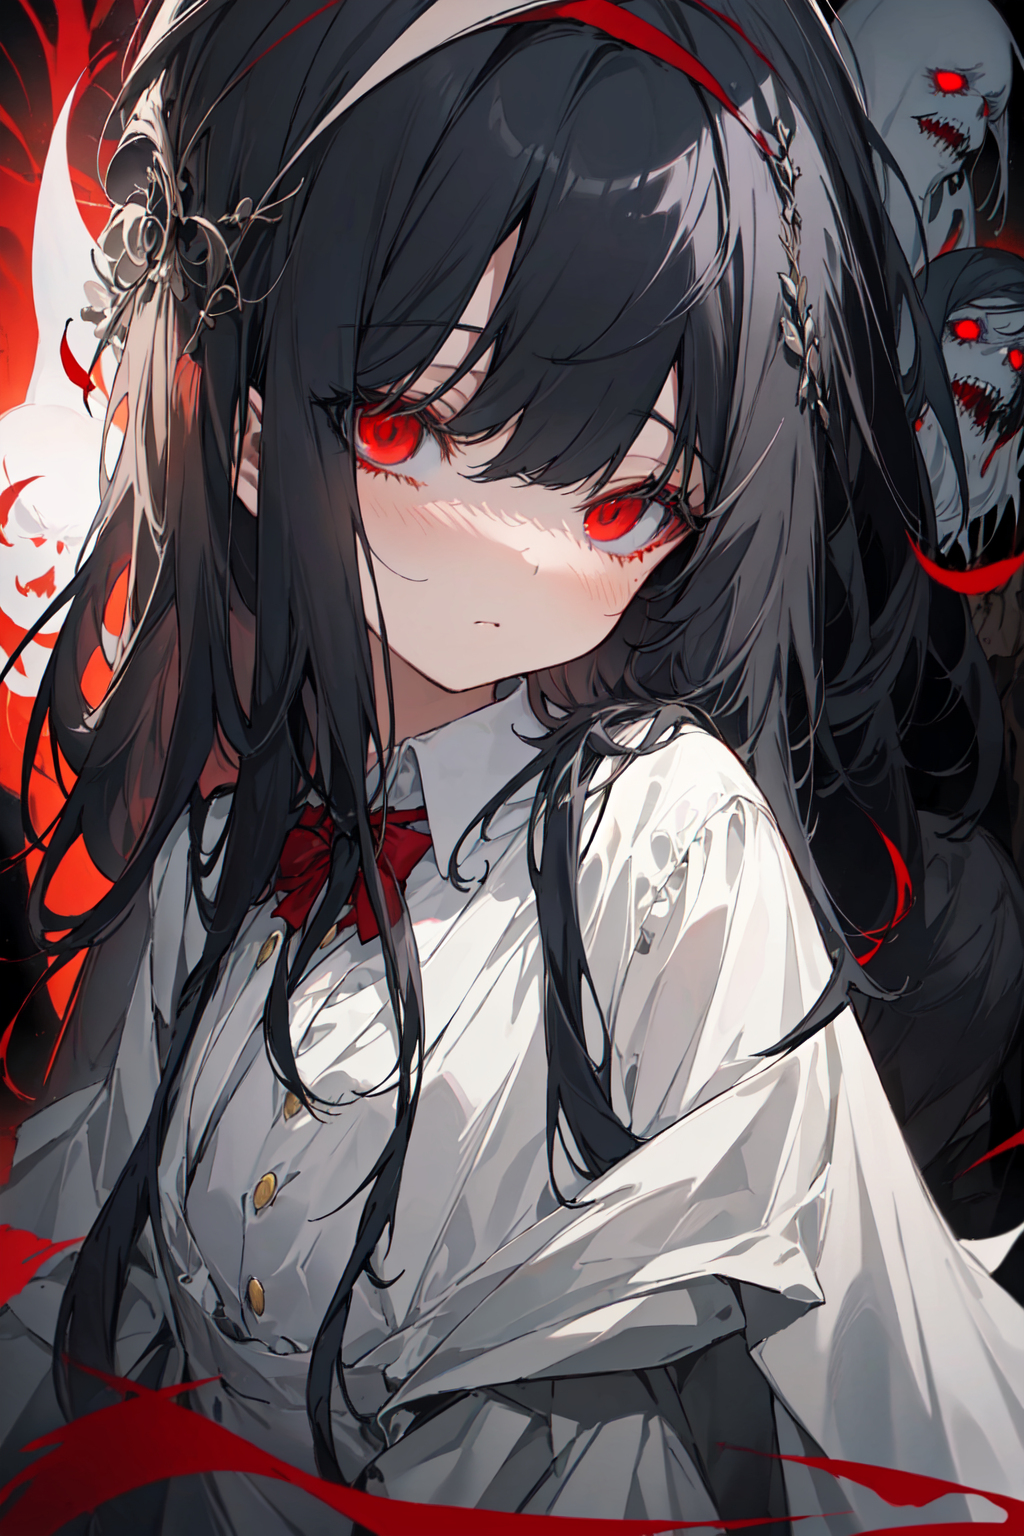 Girl With Long Black Hair Anime Bright Eyes And A Dark Backgrounds